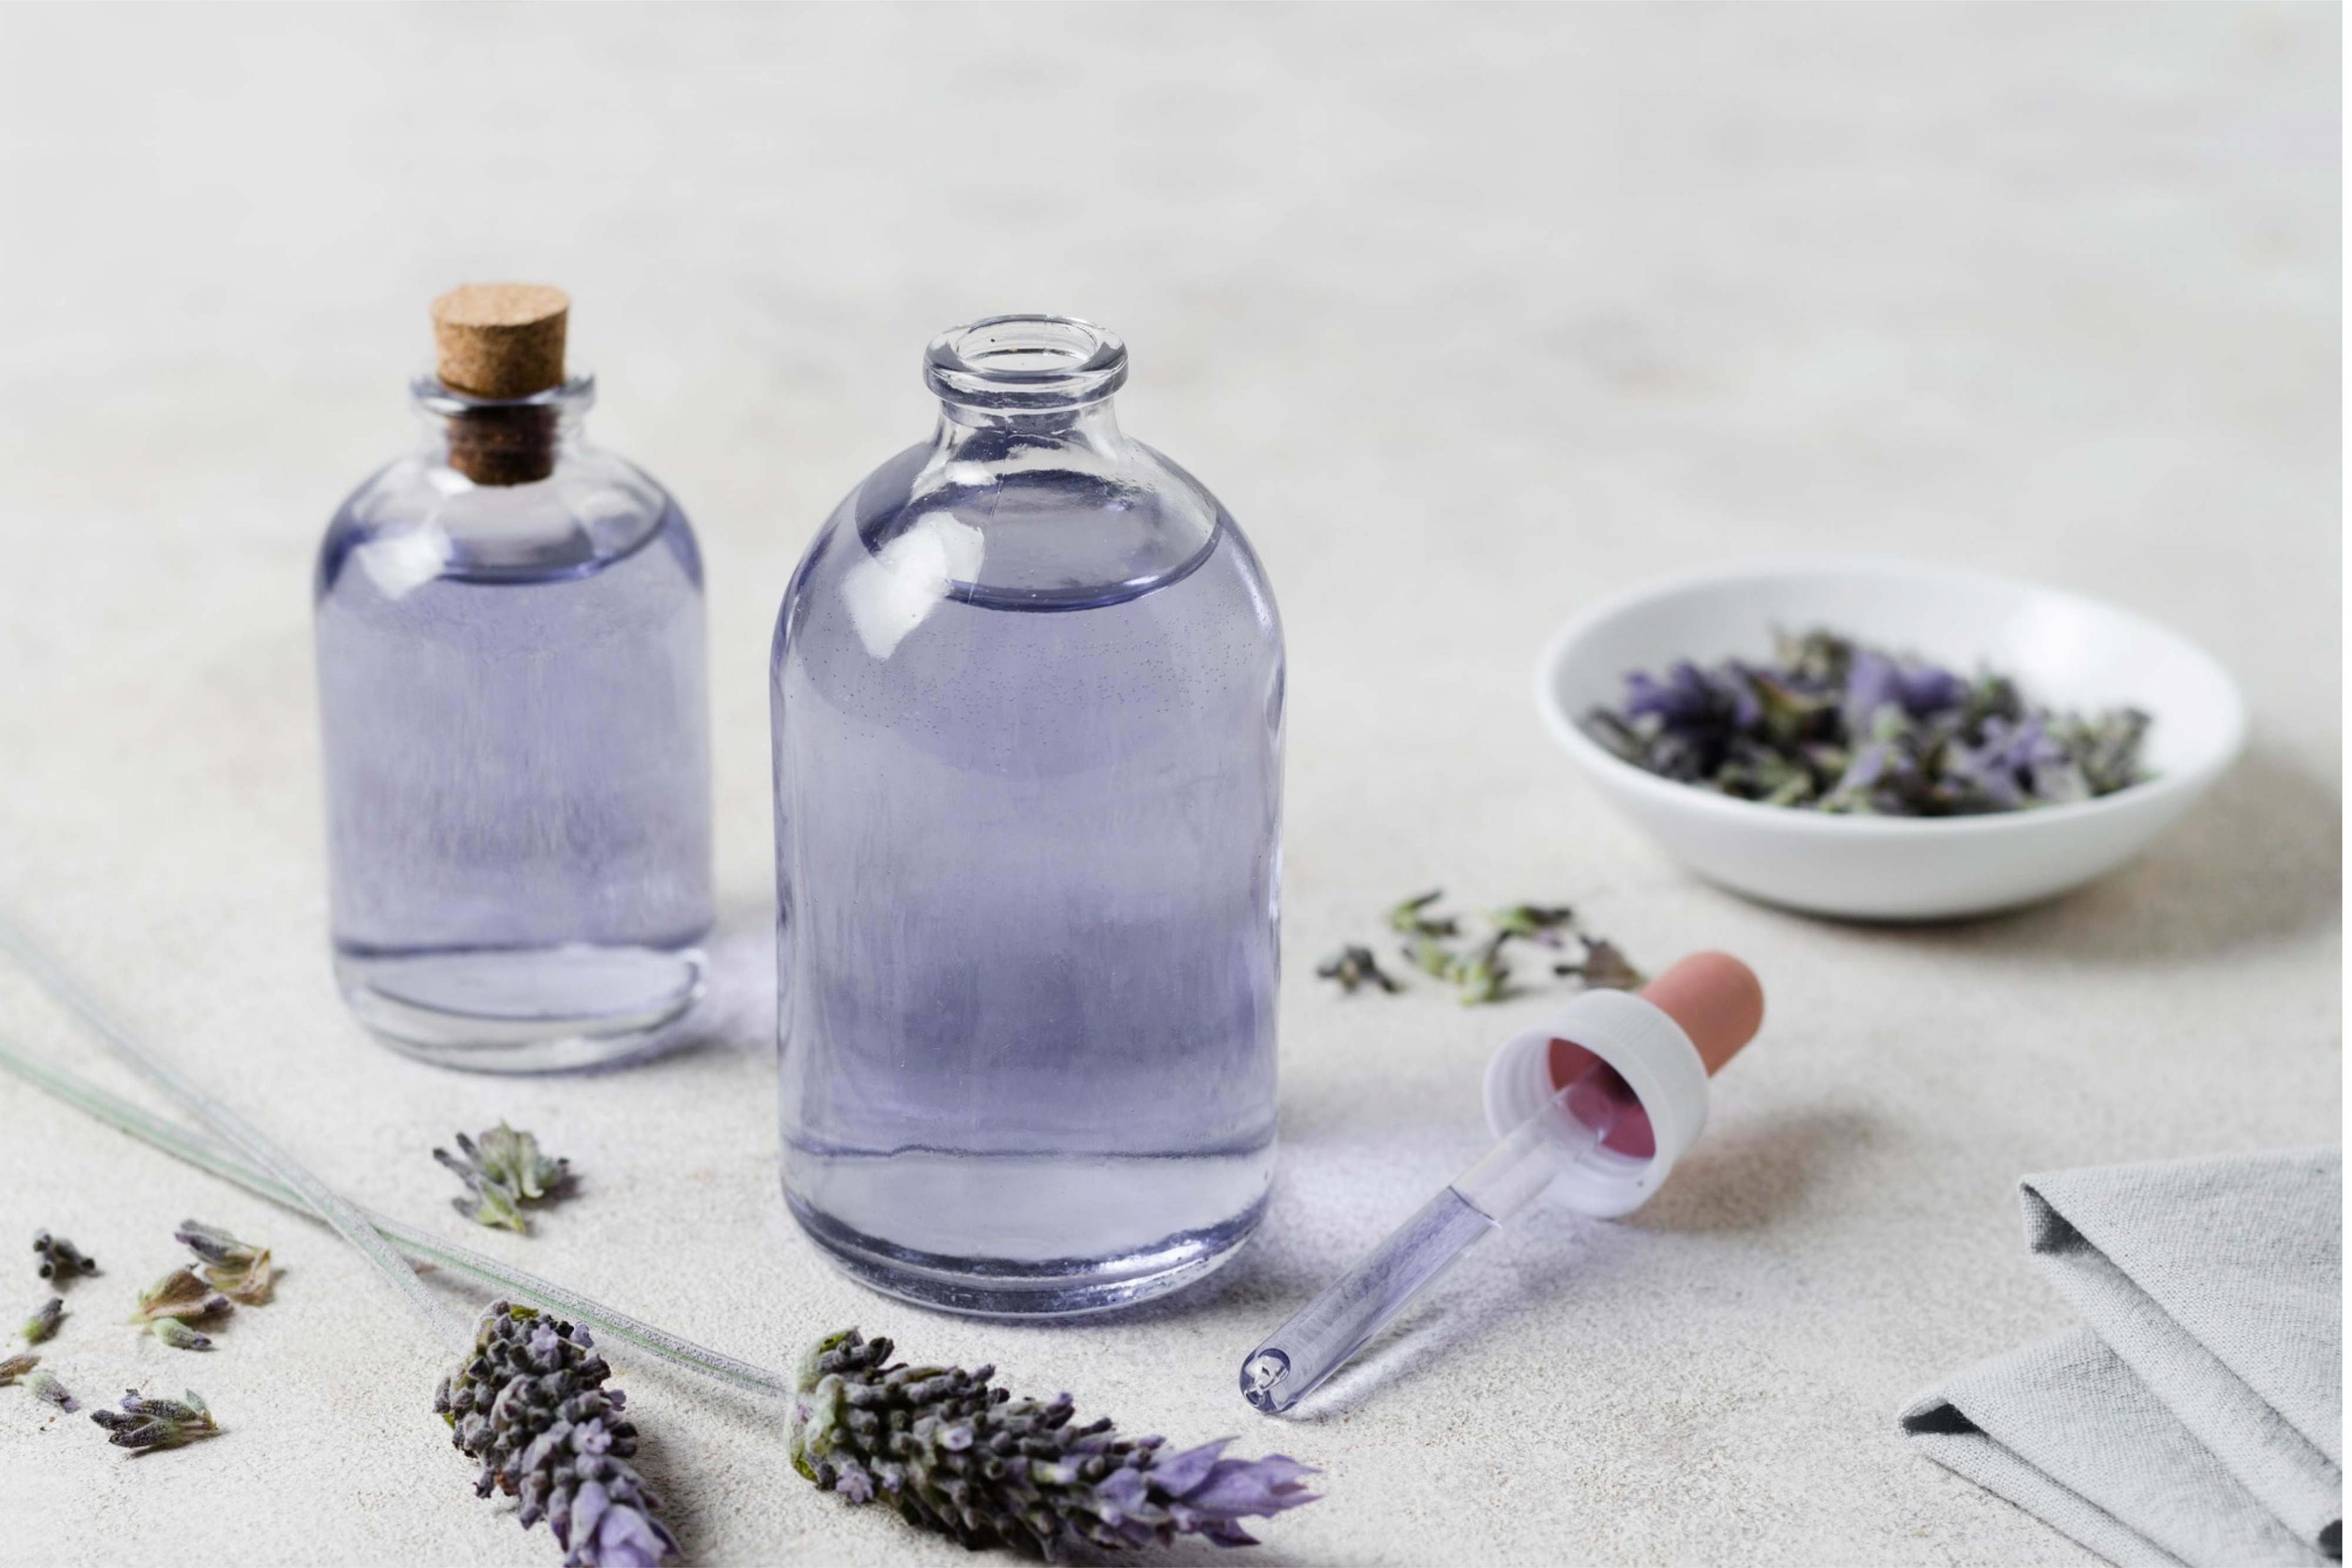 Lavender Oil Benefits For Skin and Hair and Ways to Use it